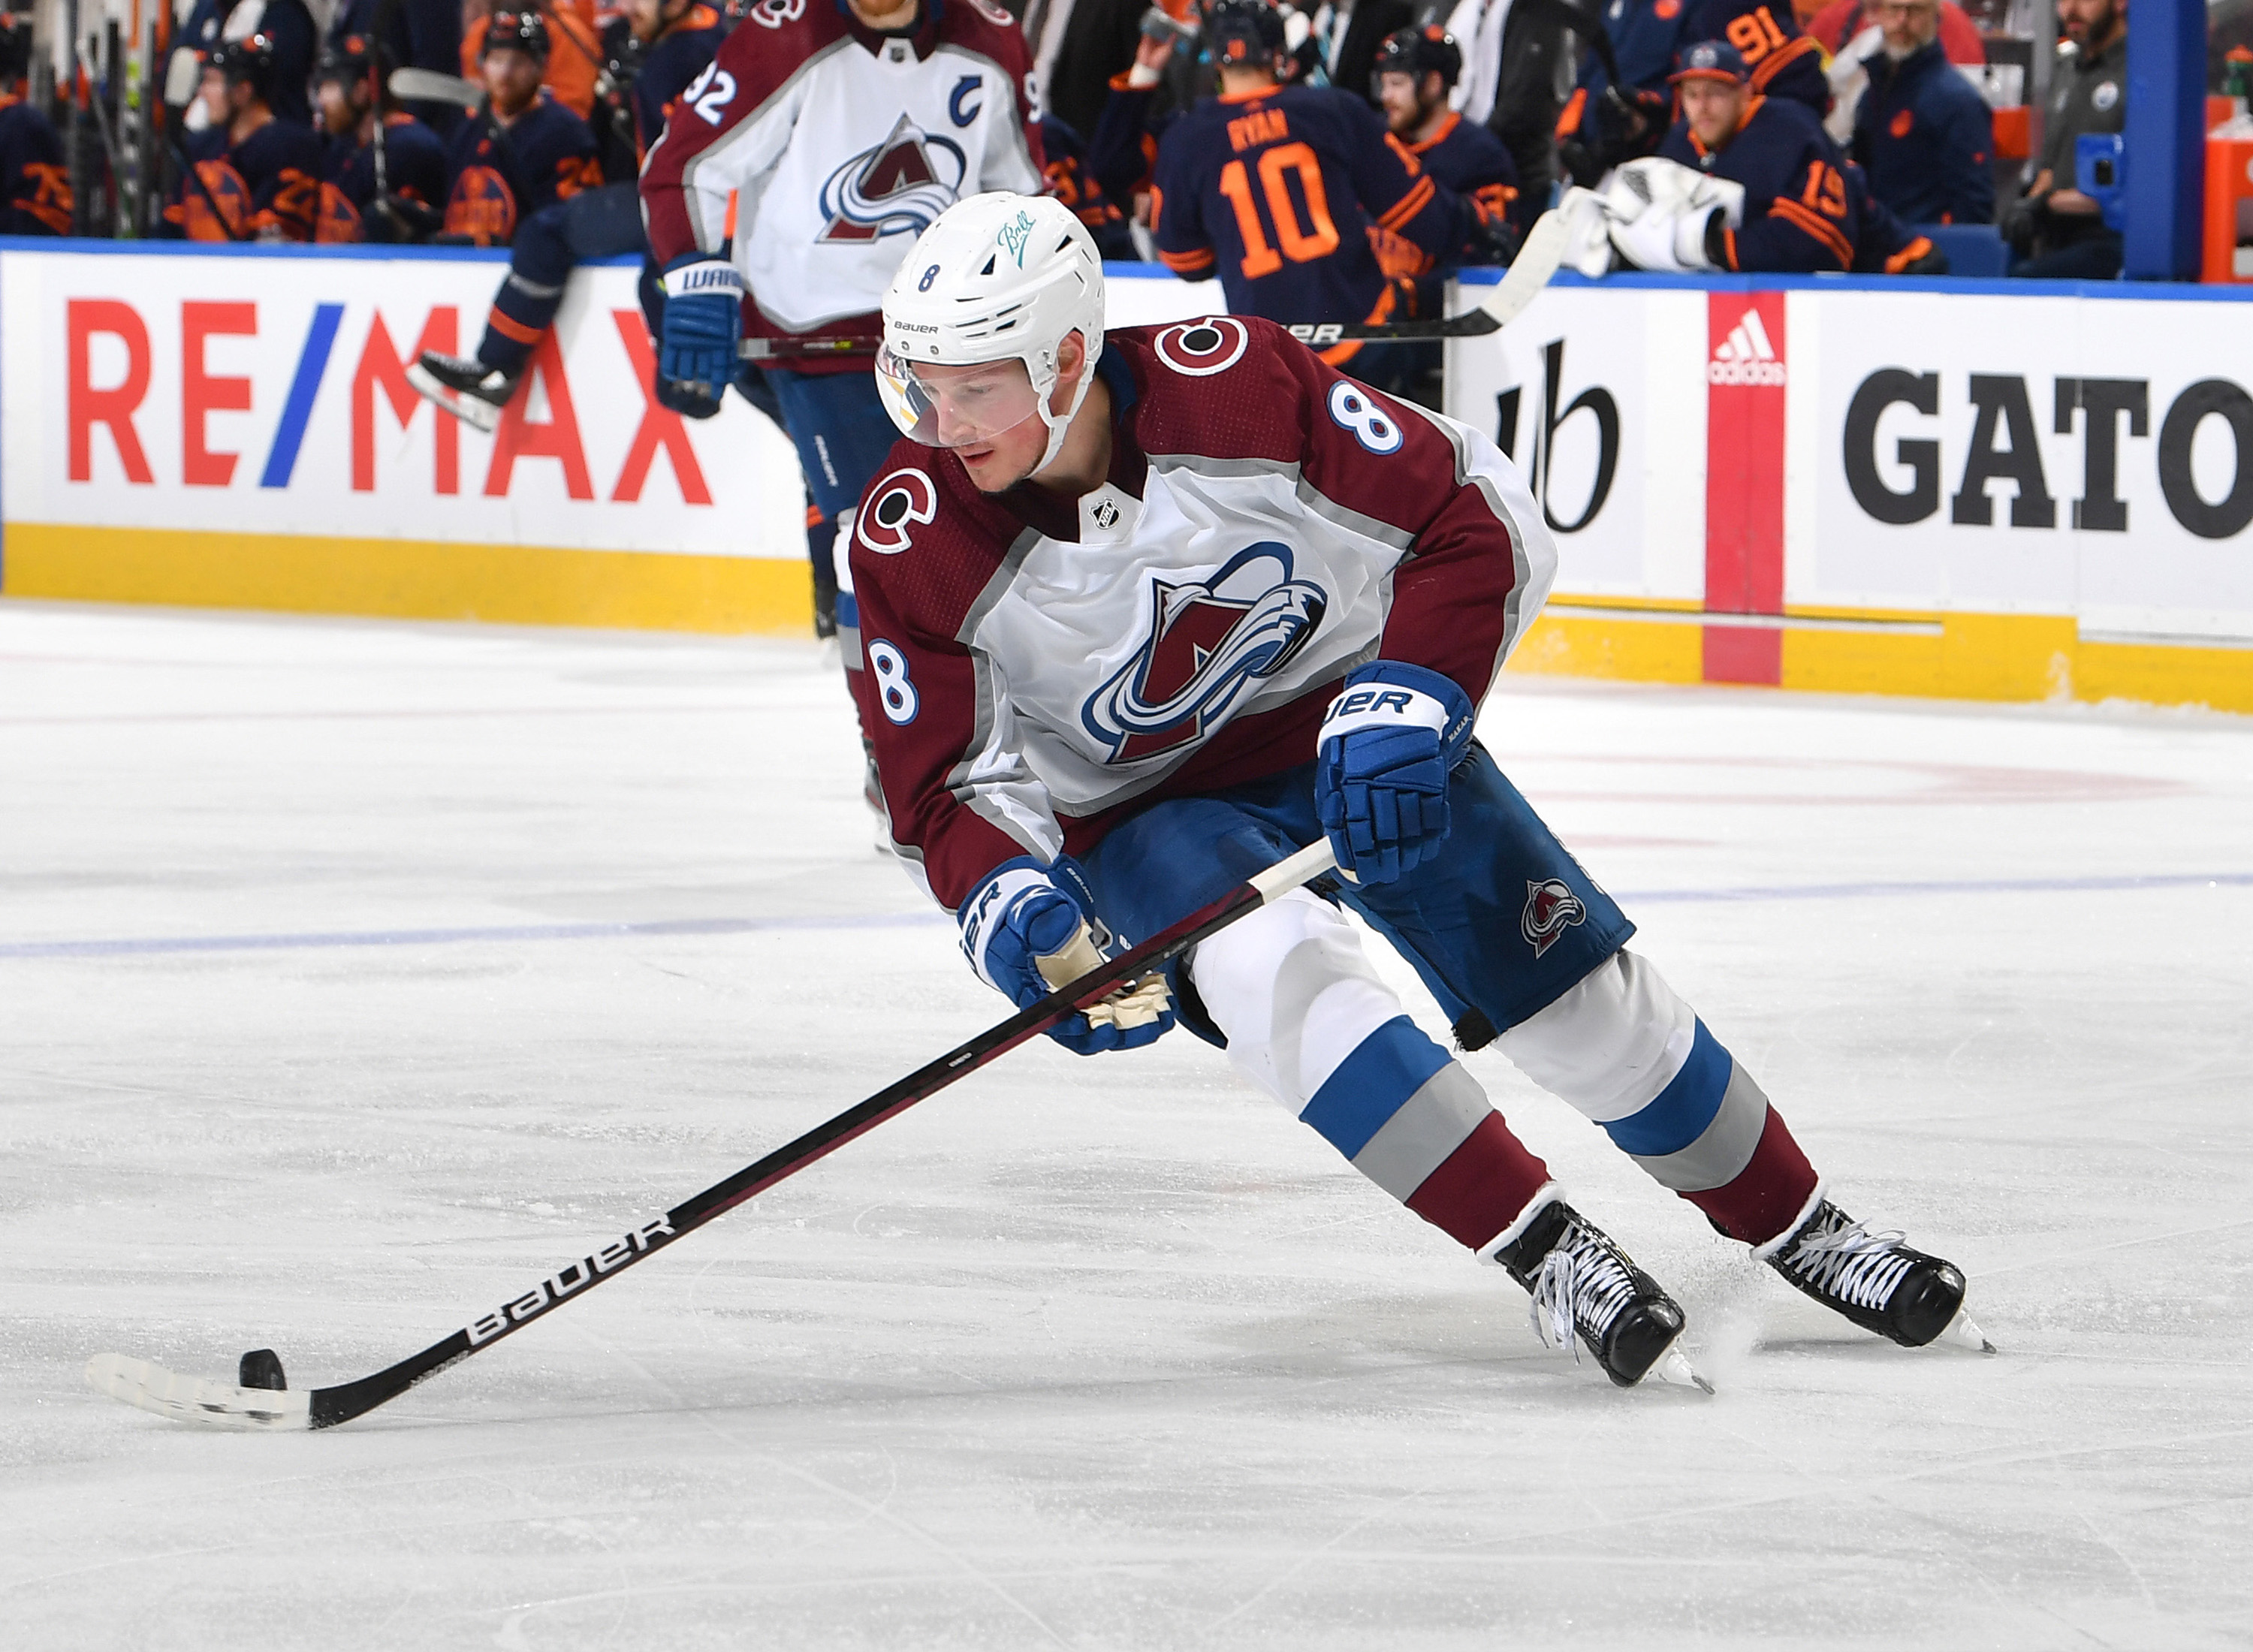 Cale Makar #8 of the Colorado Avalanche skates during Game Three of the Western Conference Final of the 2022 Stanley Cup Playoffs against the Edmonton Oilers on June 4, 2022 at Rogers Place in Edmonton, Alberta, Canada.